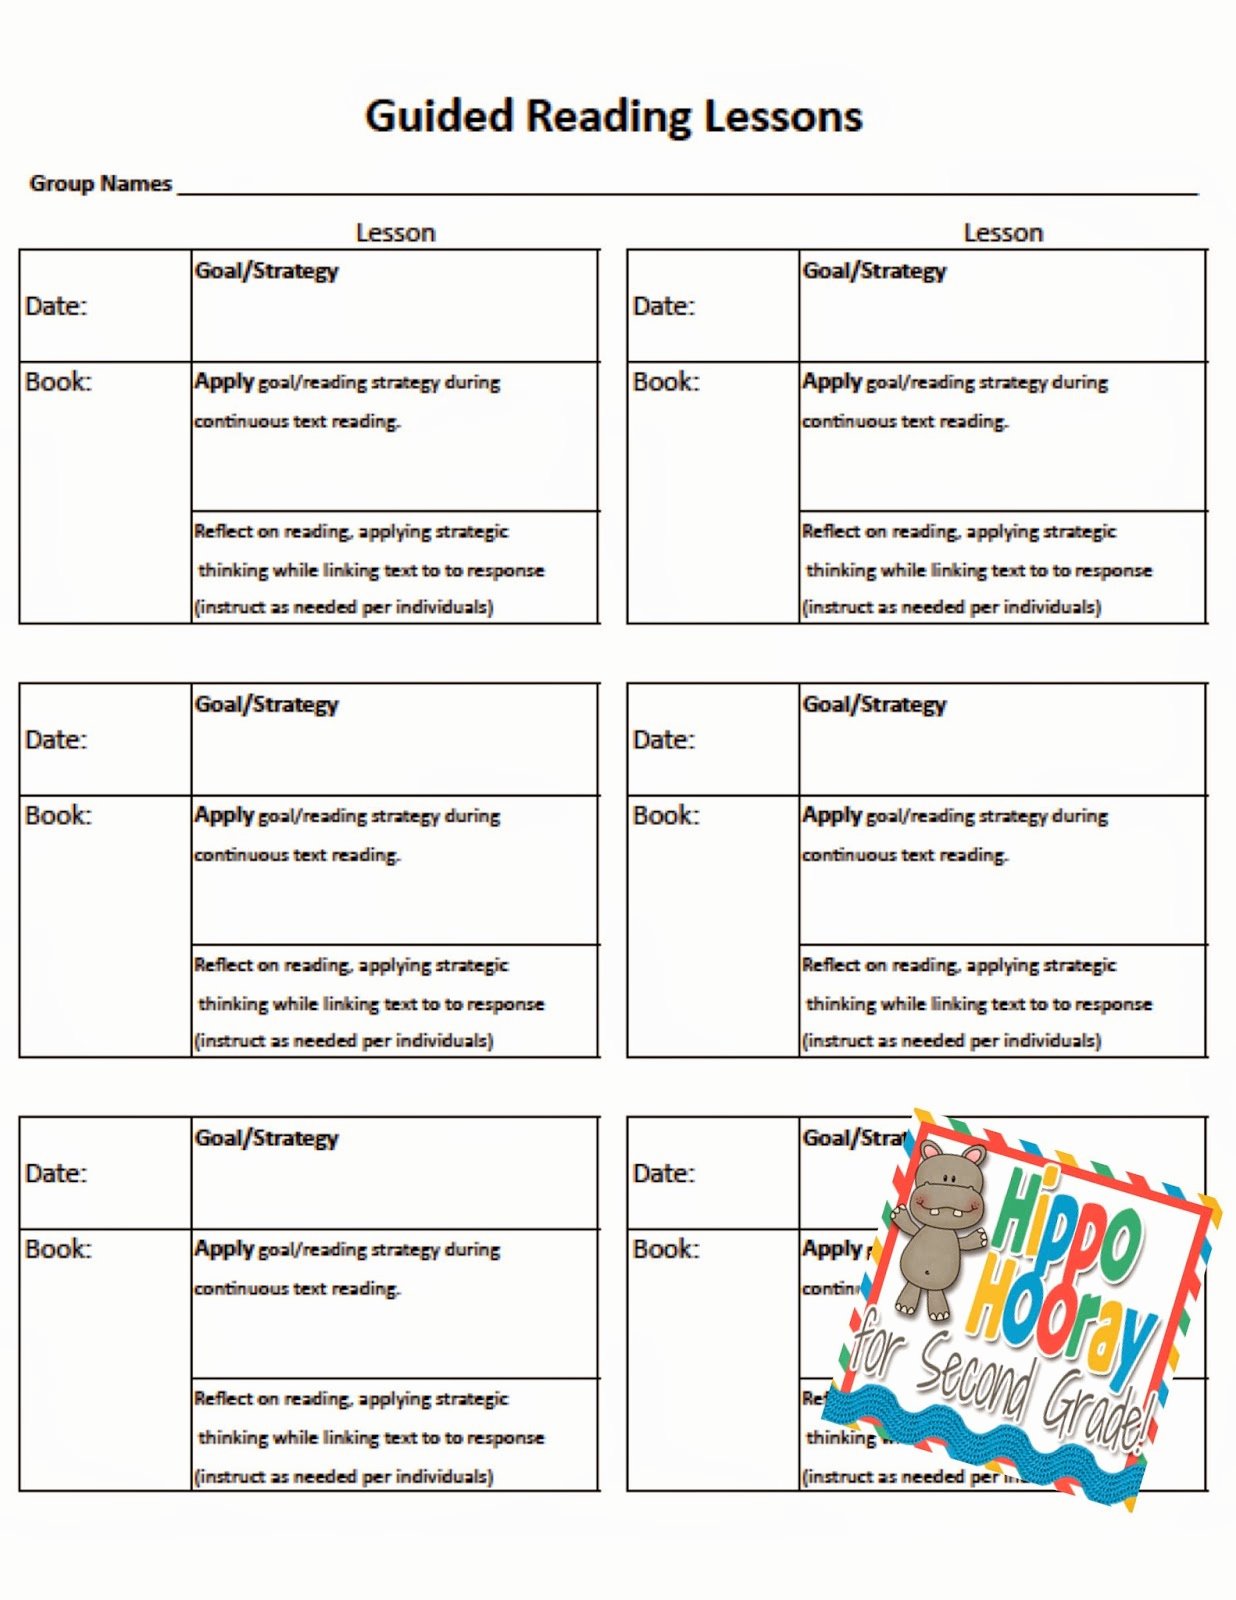 Guided Reading Lesson Planning and Note Taking